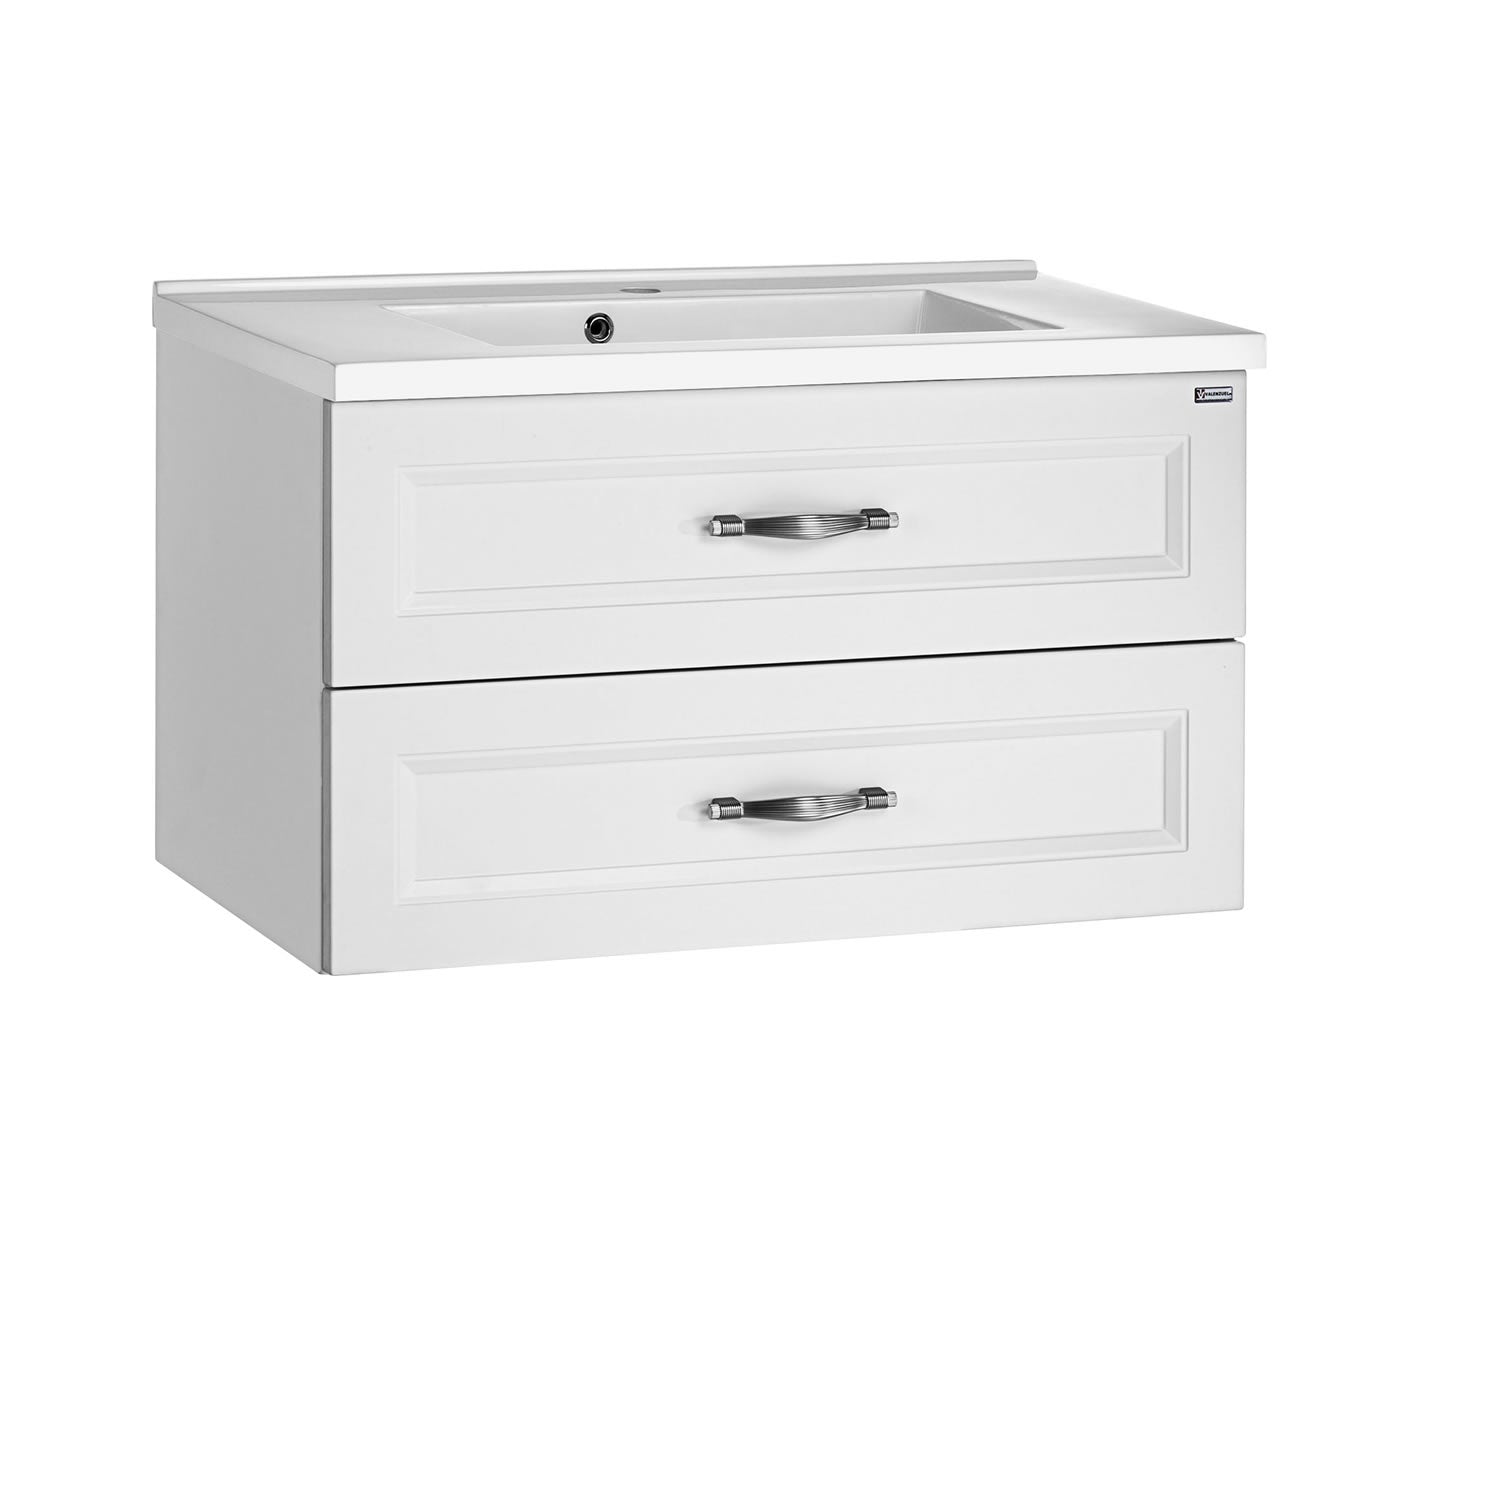 32" Single Vanity, Wall Mount, 2 Drawers with Soft Close, White Matt, Serie Class by VALENZUELA